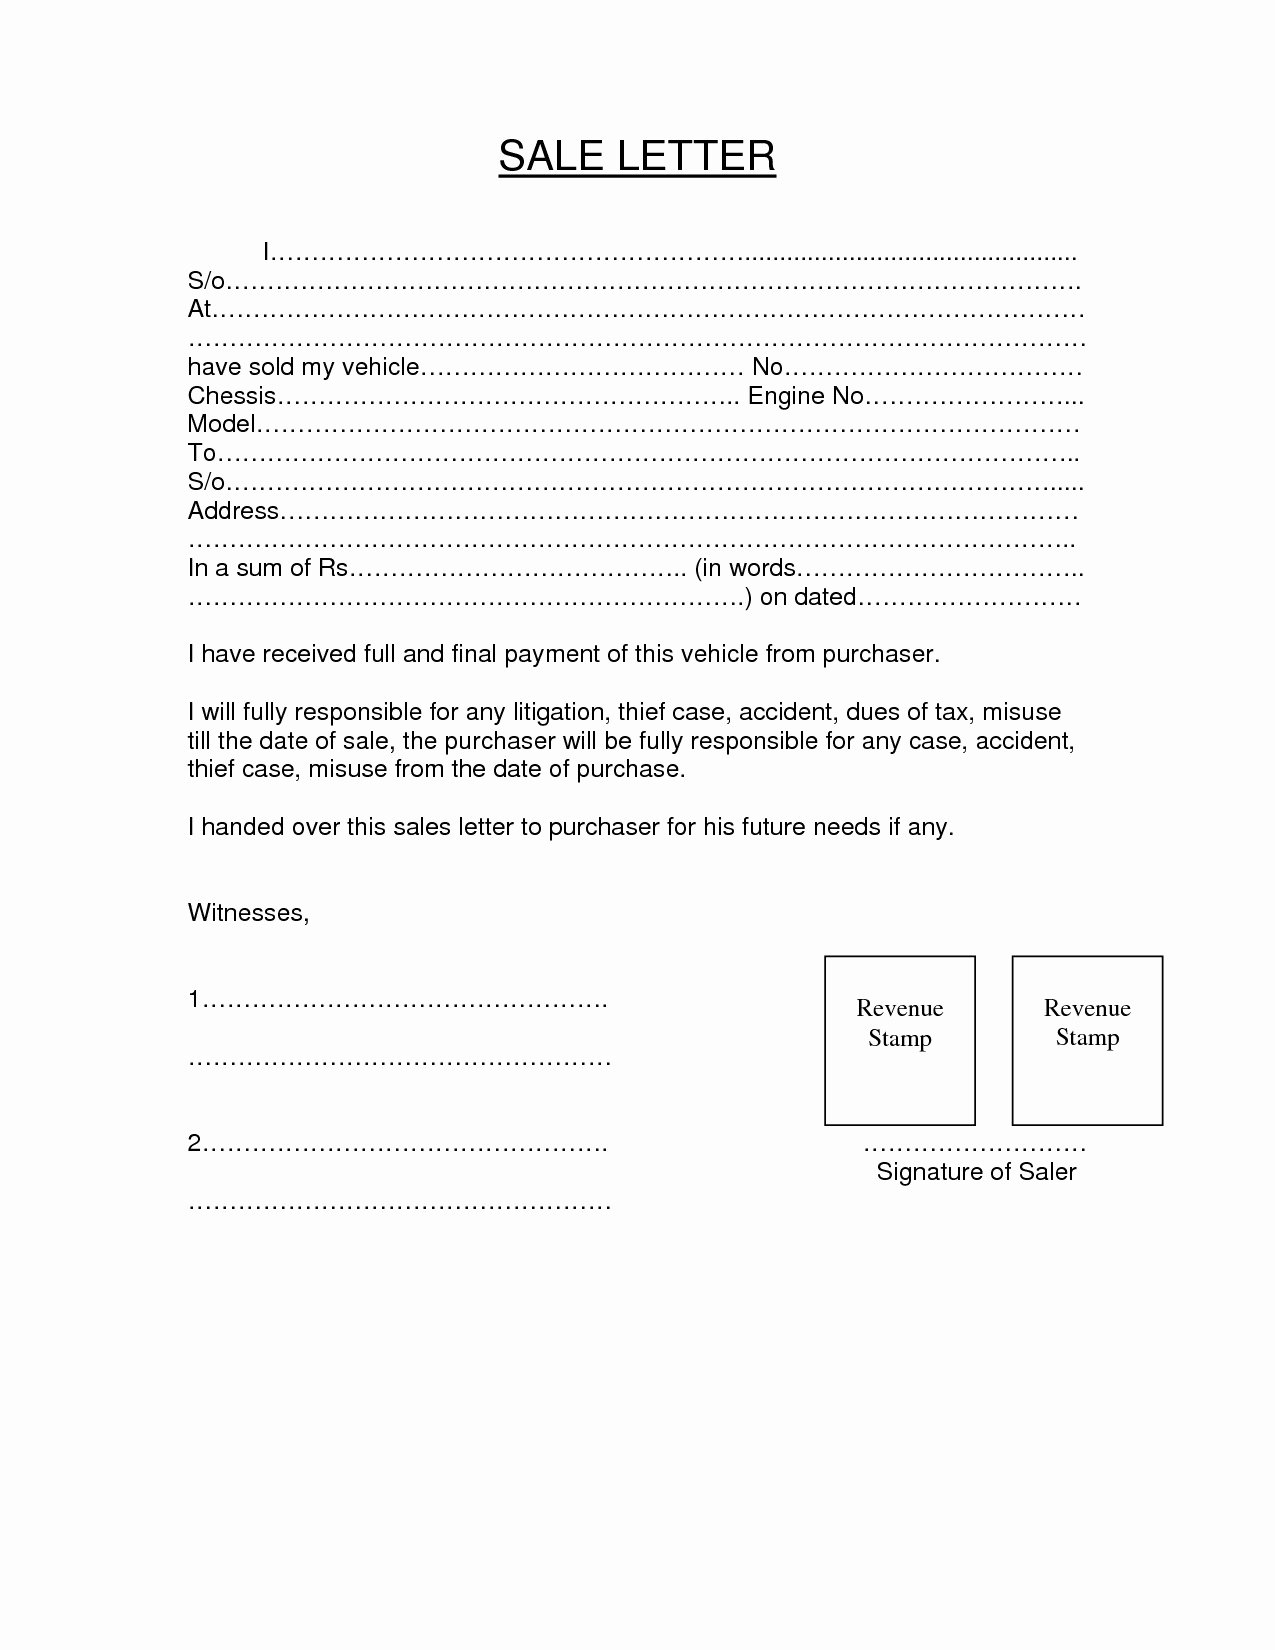 Car Accident Payment Agreement Letter Sample Inspirational Full and Final Settlement Letter Template Car Accident